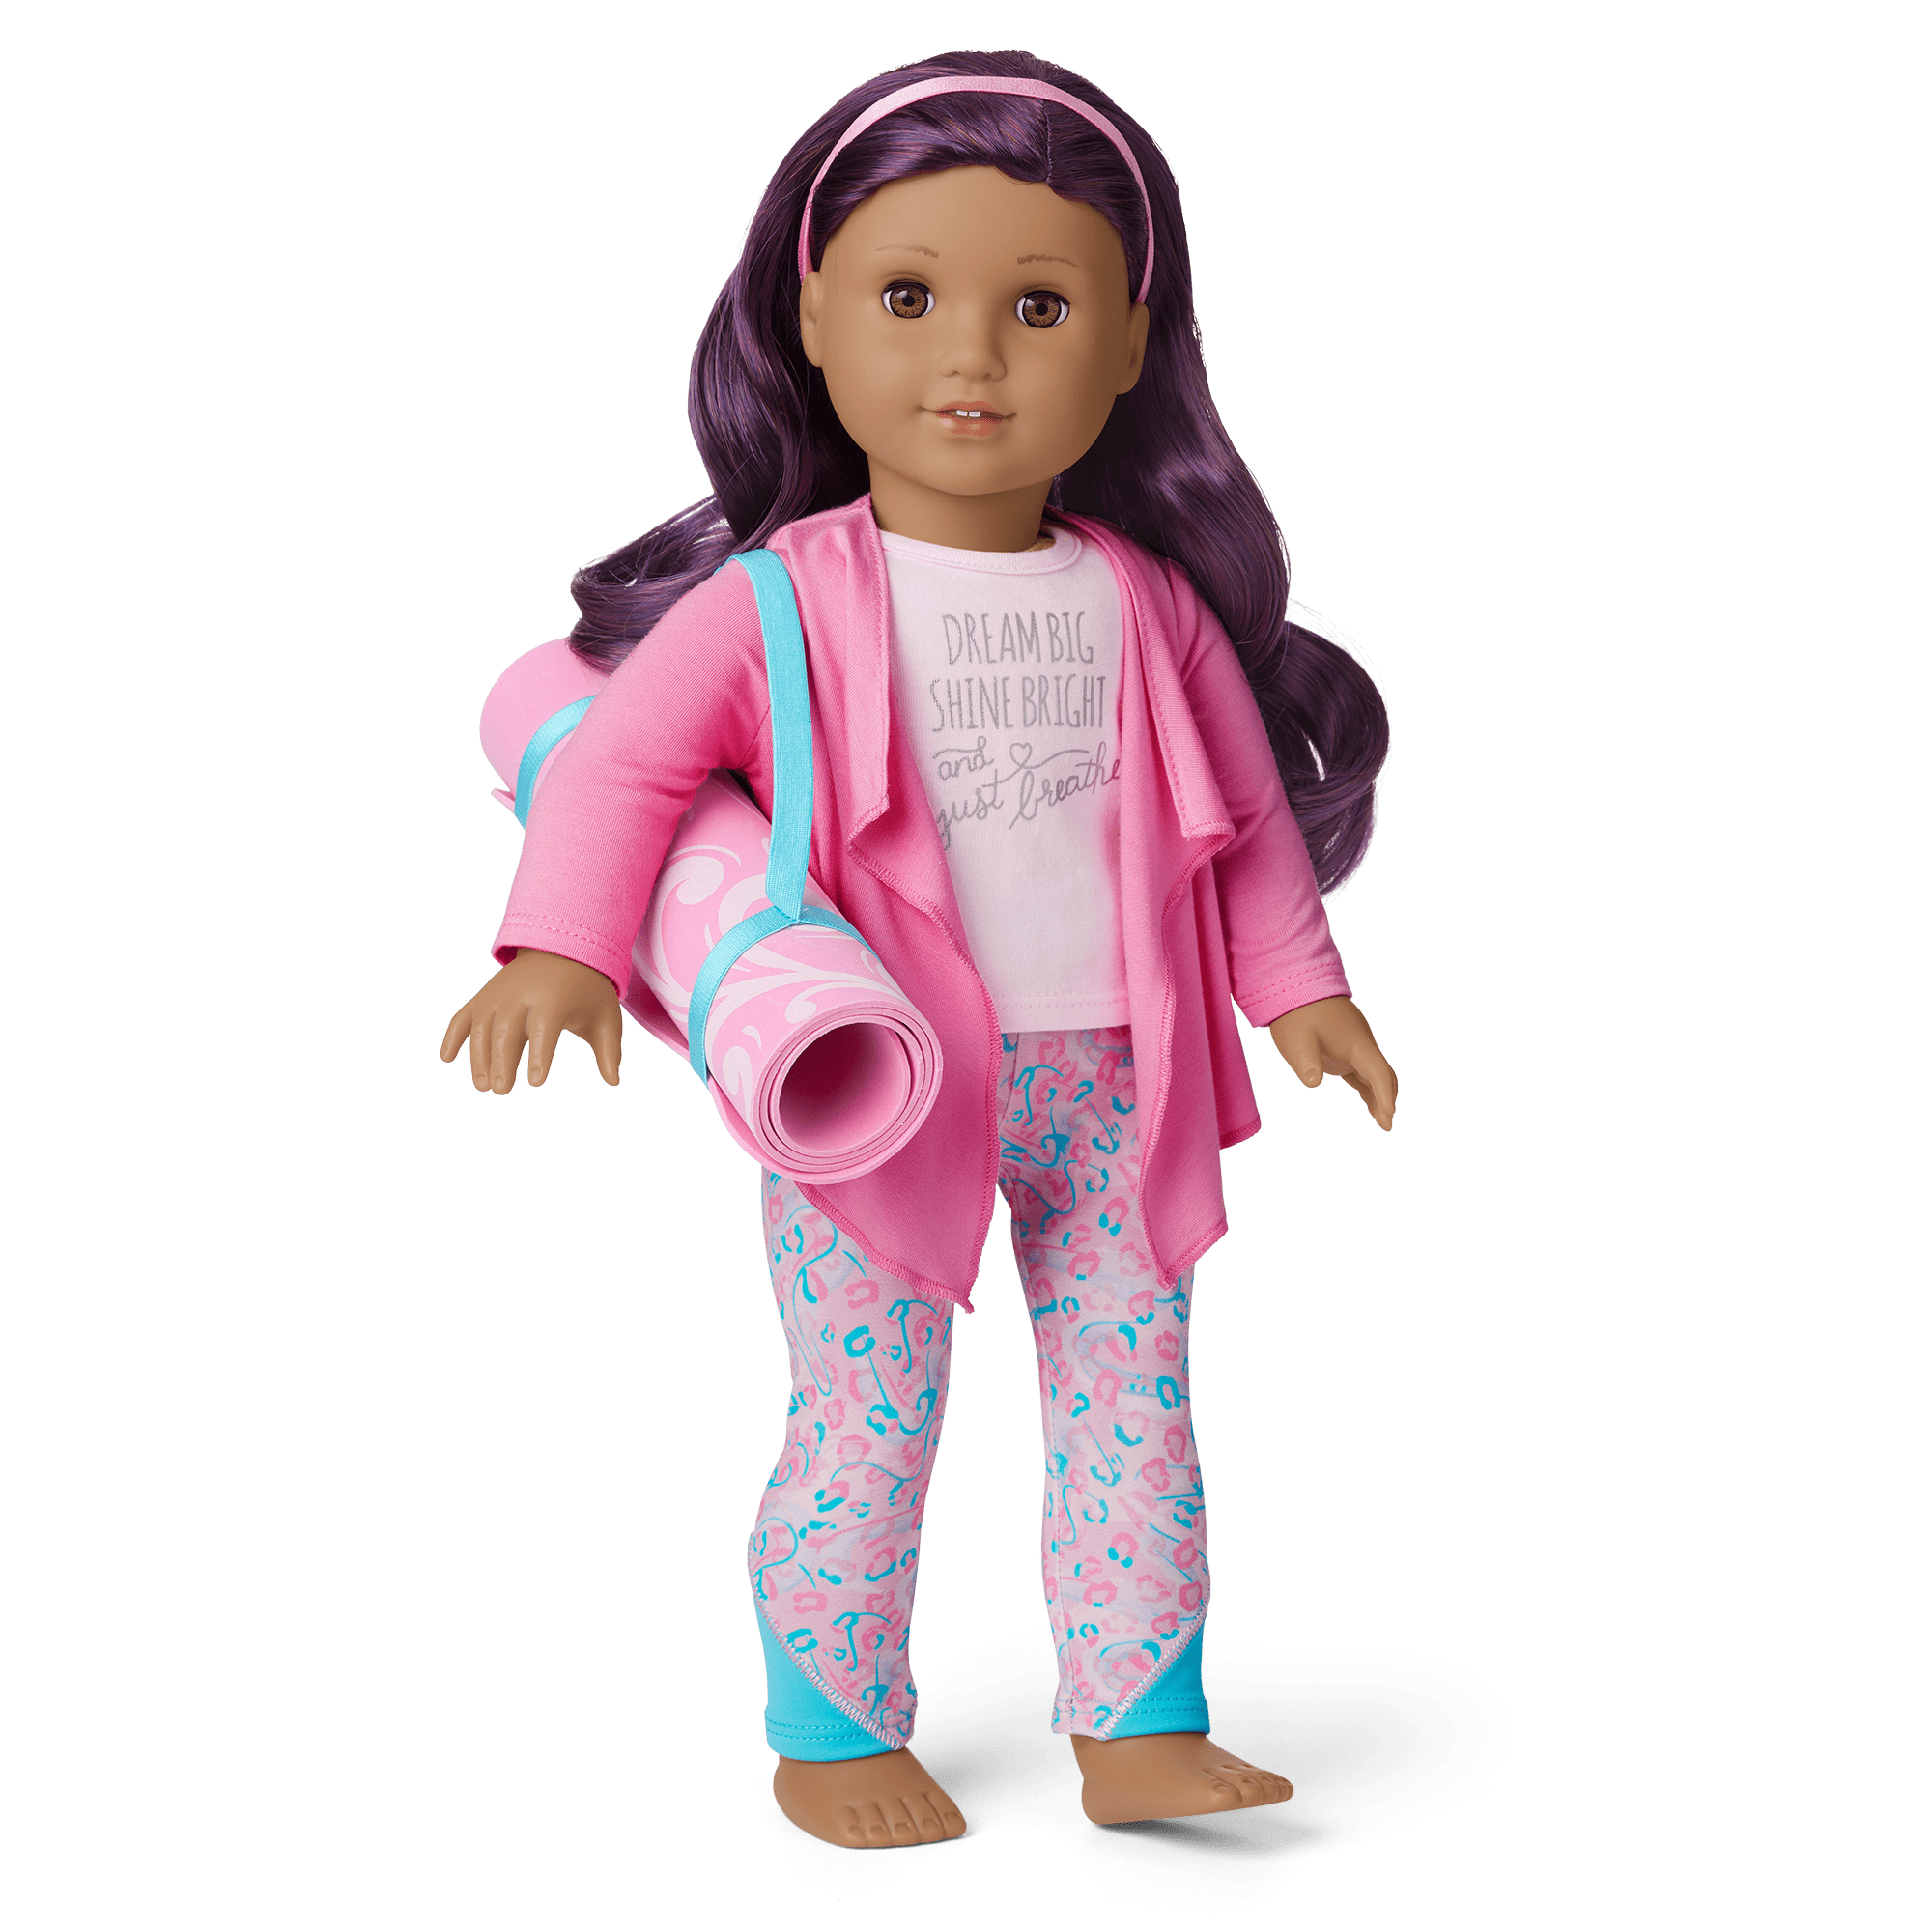 Doll Clothes Shoes Yoga Pilates Clothes Yoga Mat Yoga Outfits Towel for  American 18 Inch Girl Doll 43cm Born Baby Accessories